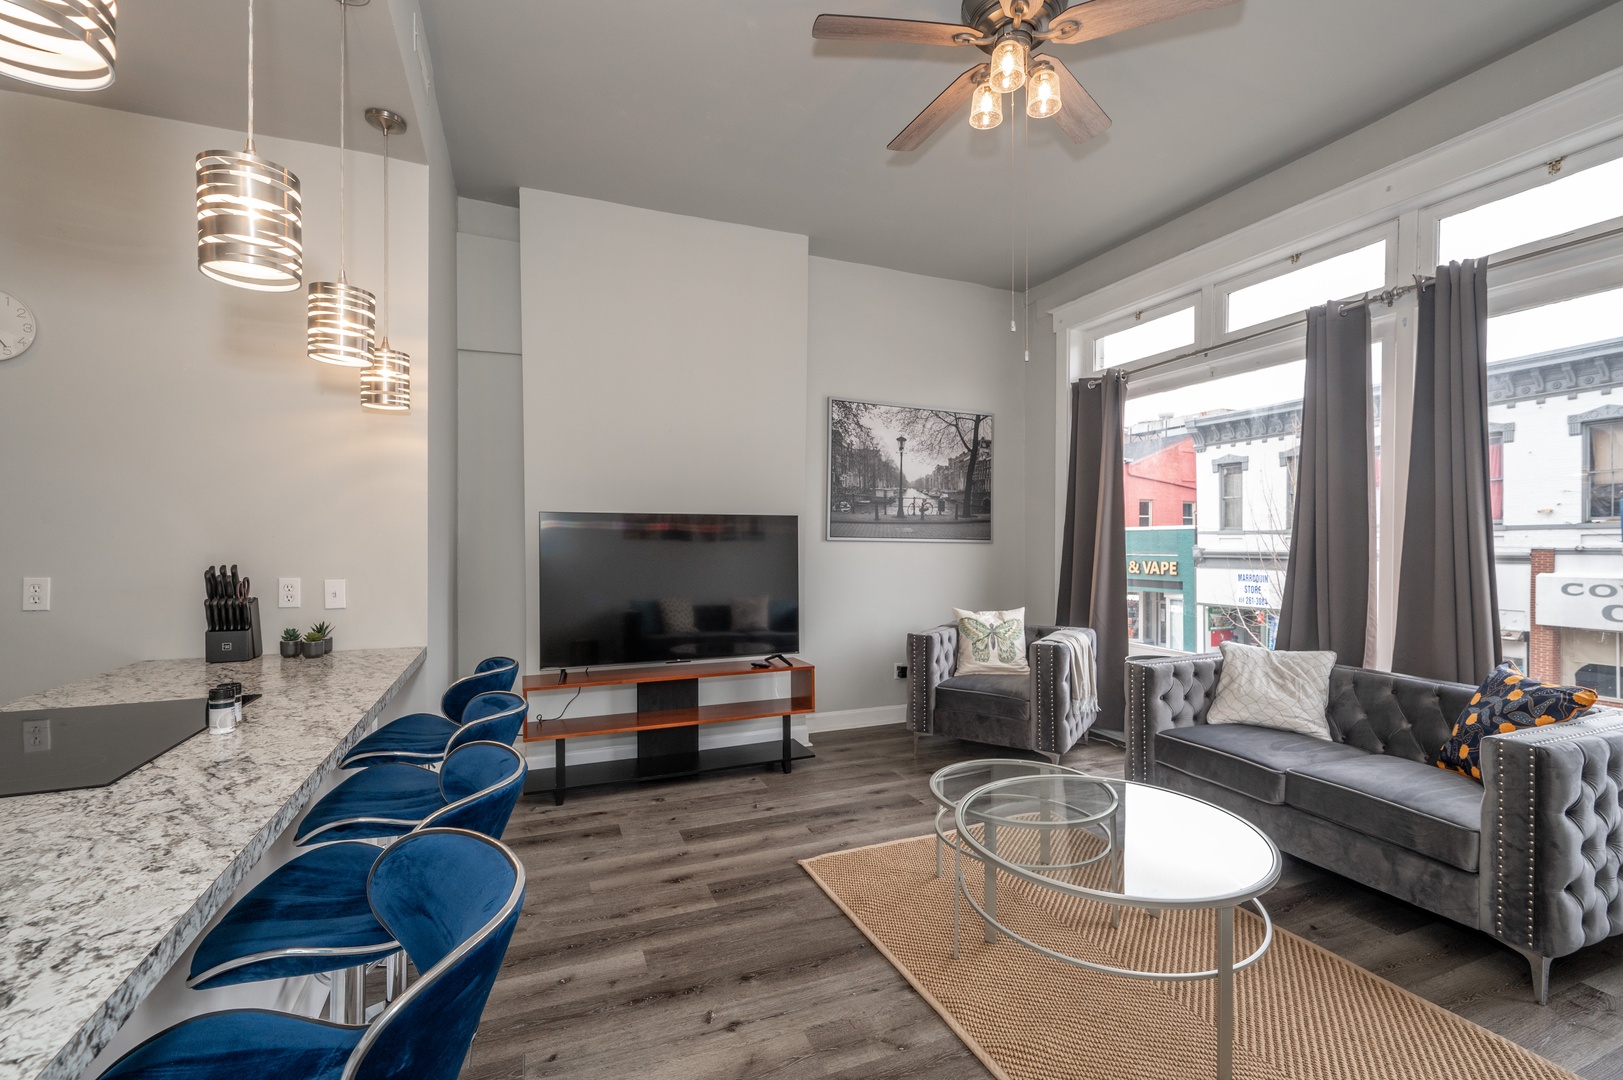 Whether you’re chilling at the counter or kicking back on the sofas, you’ll love relaxing in this modern condo